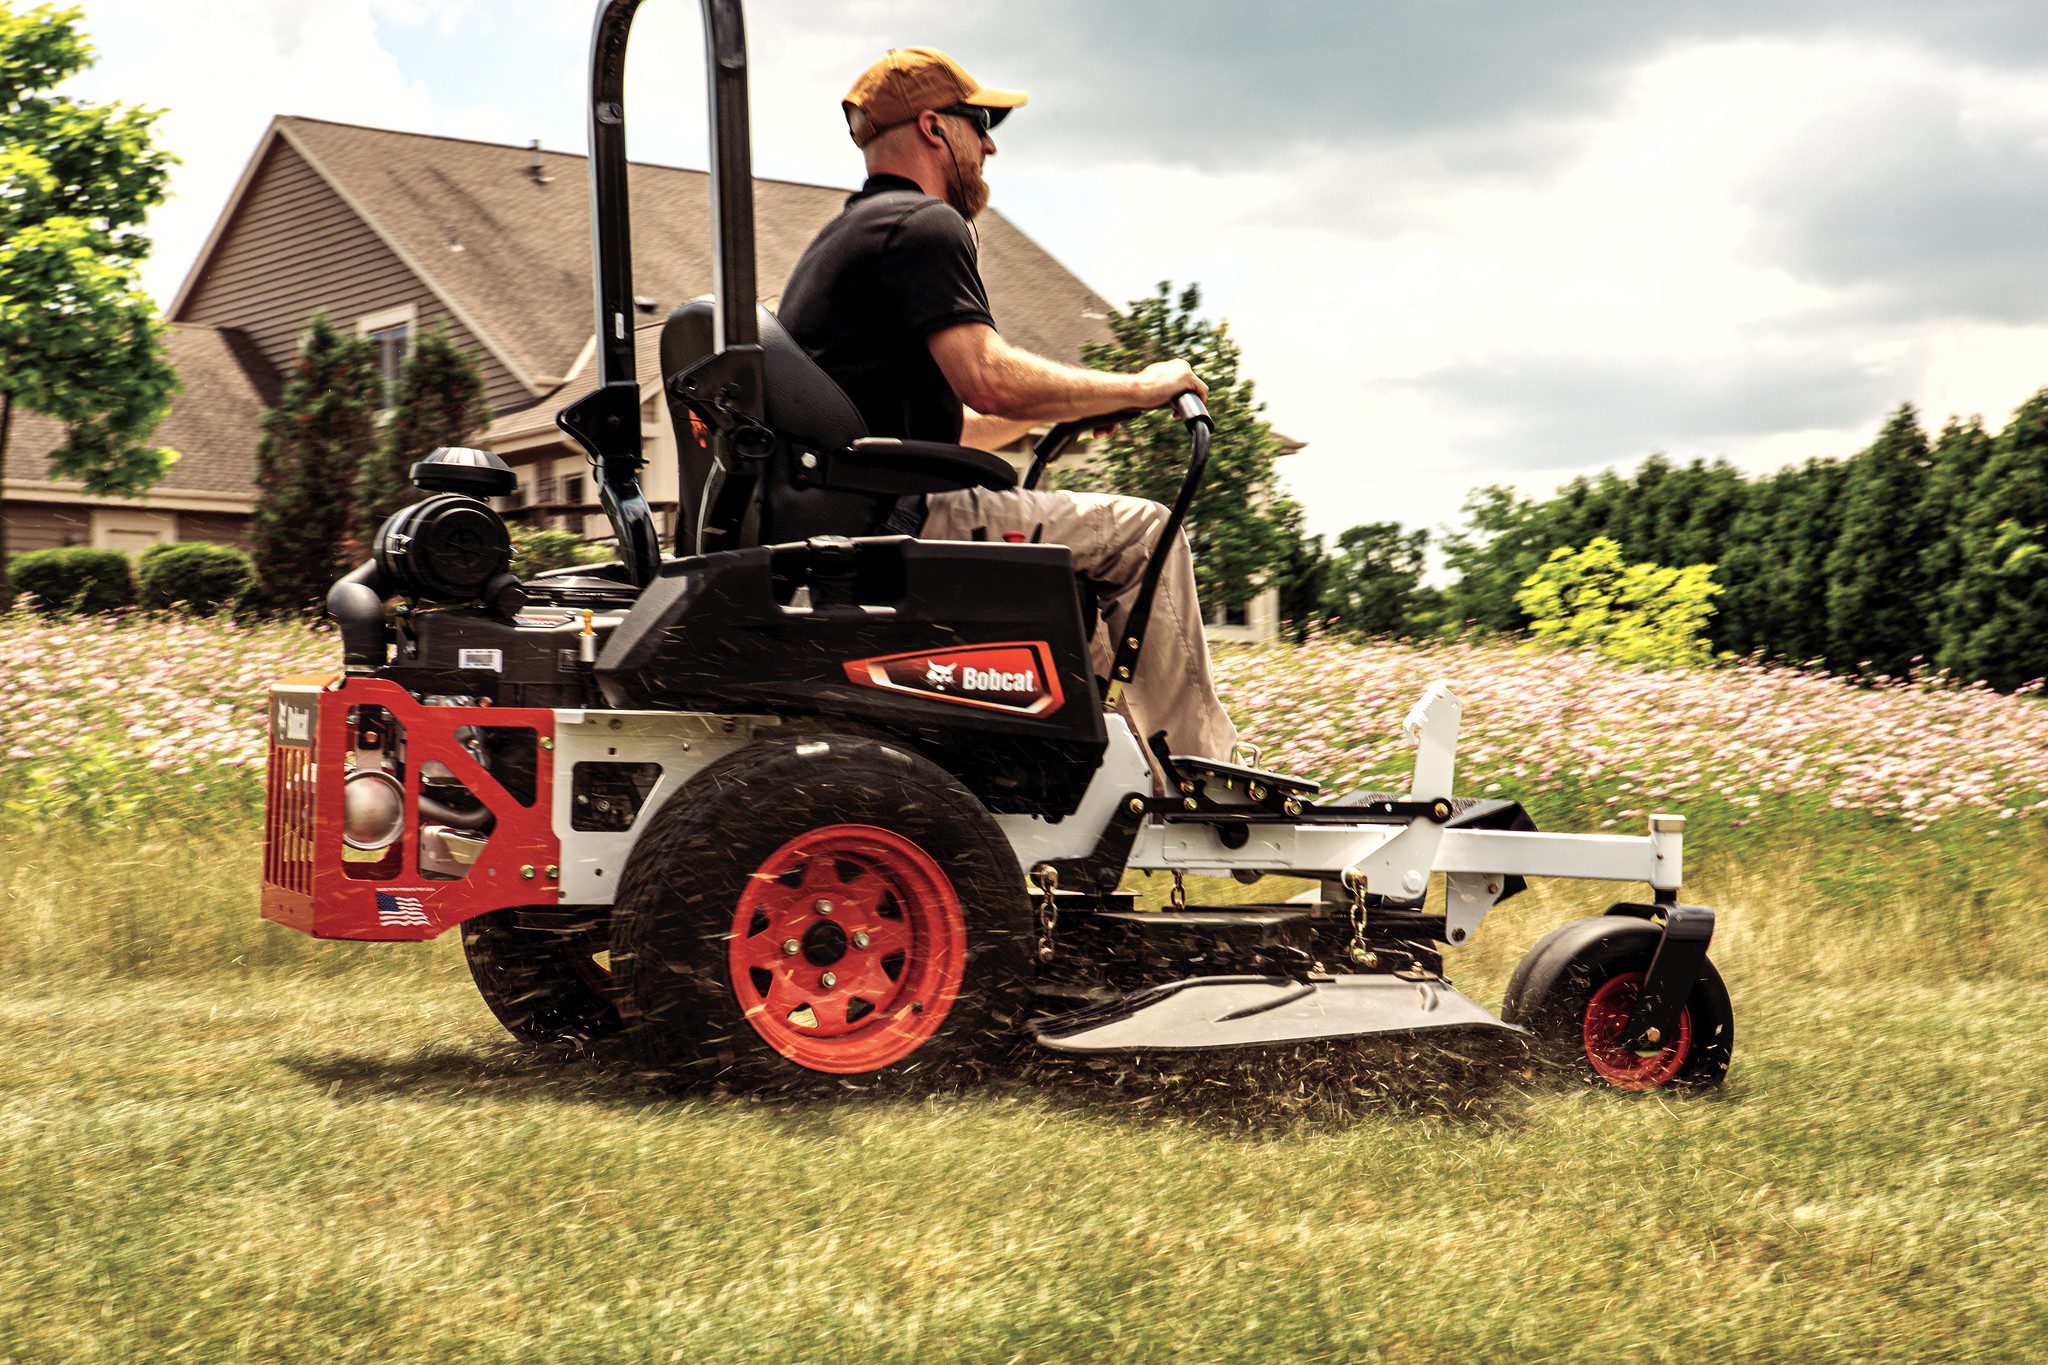 Browse Specs and more for the Bobcat ZT3500 Zero-Turn Mower 48″ - Bobcat of the Rockies